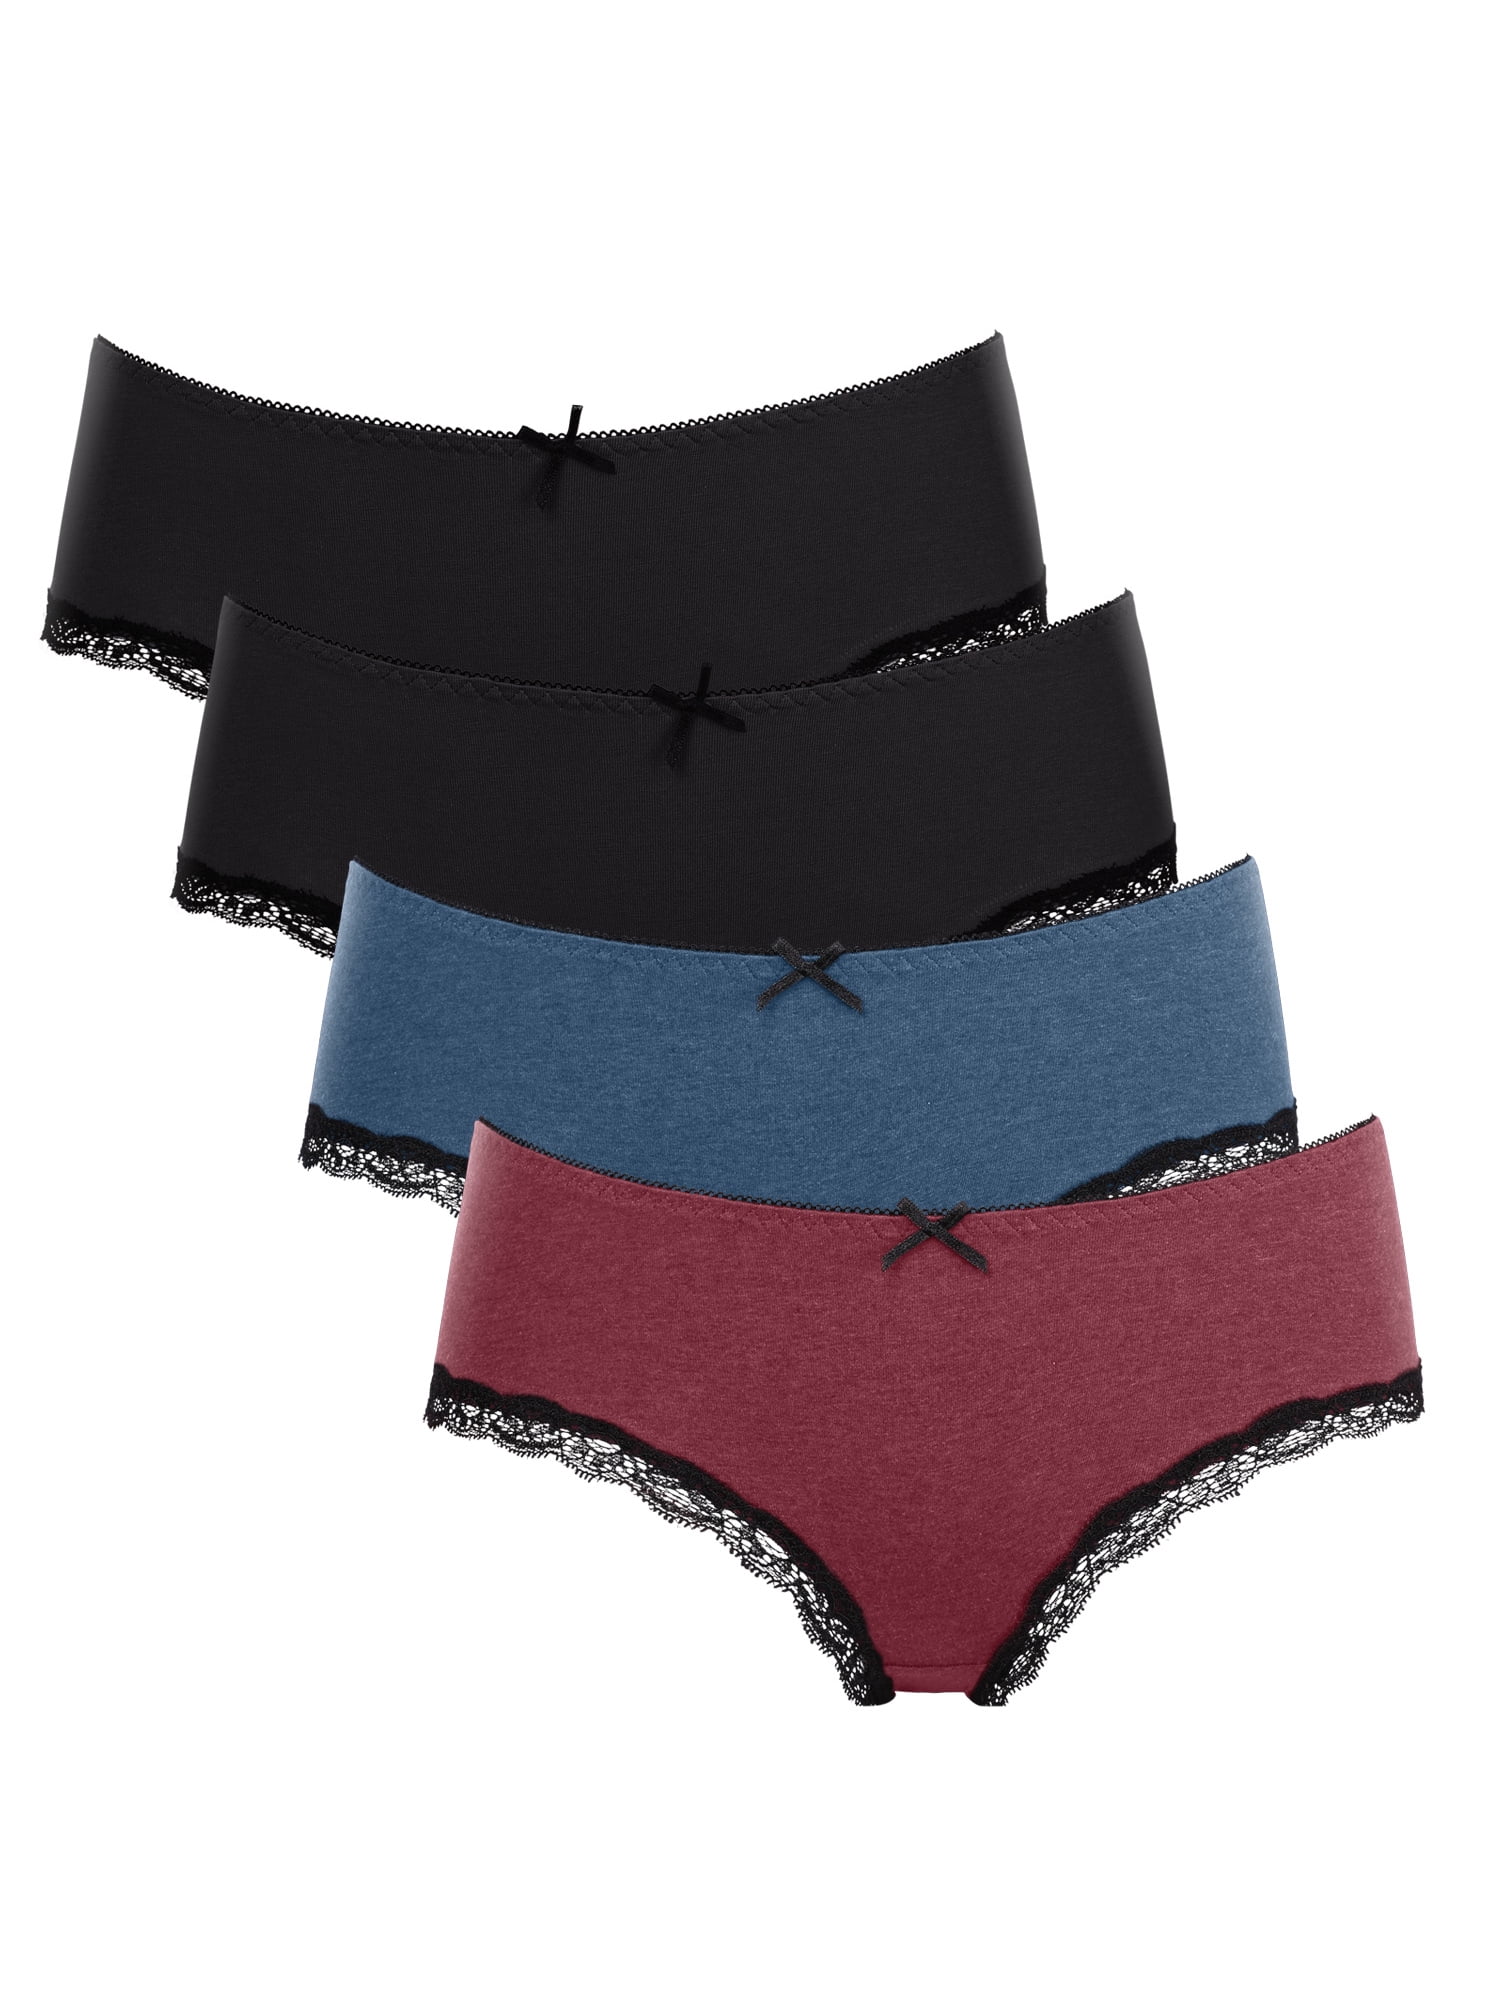 BeautyIn Women's Underwear Cotton Panties with Bow Lace Trim